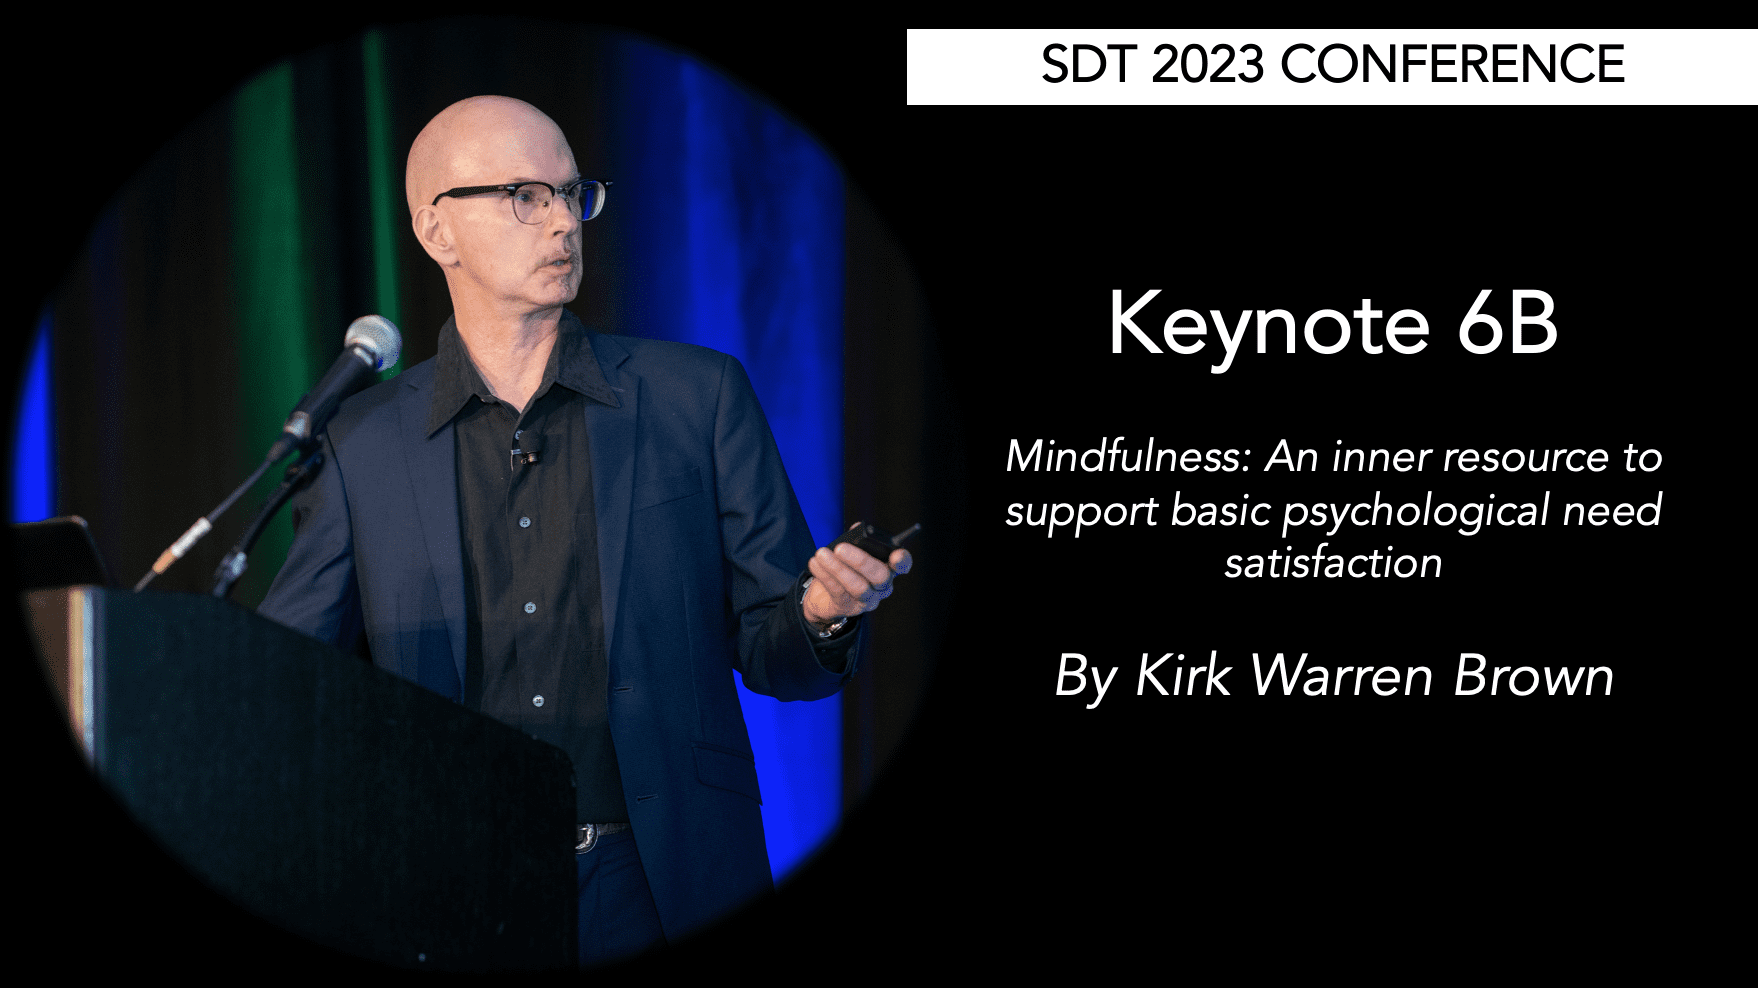 Mindfulness An inner resource to support basic psychological need satisfaction  Kirk Warren Brown keynote  SDT2023